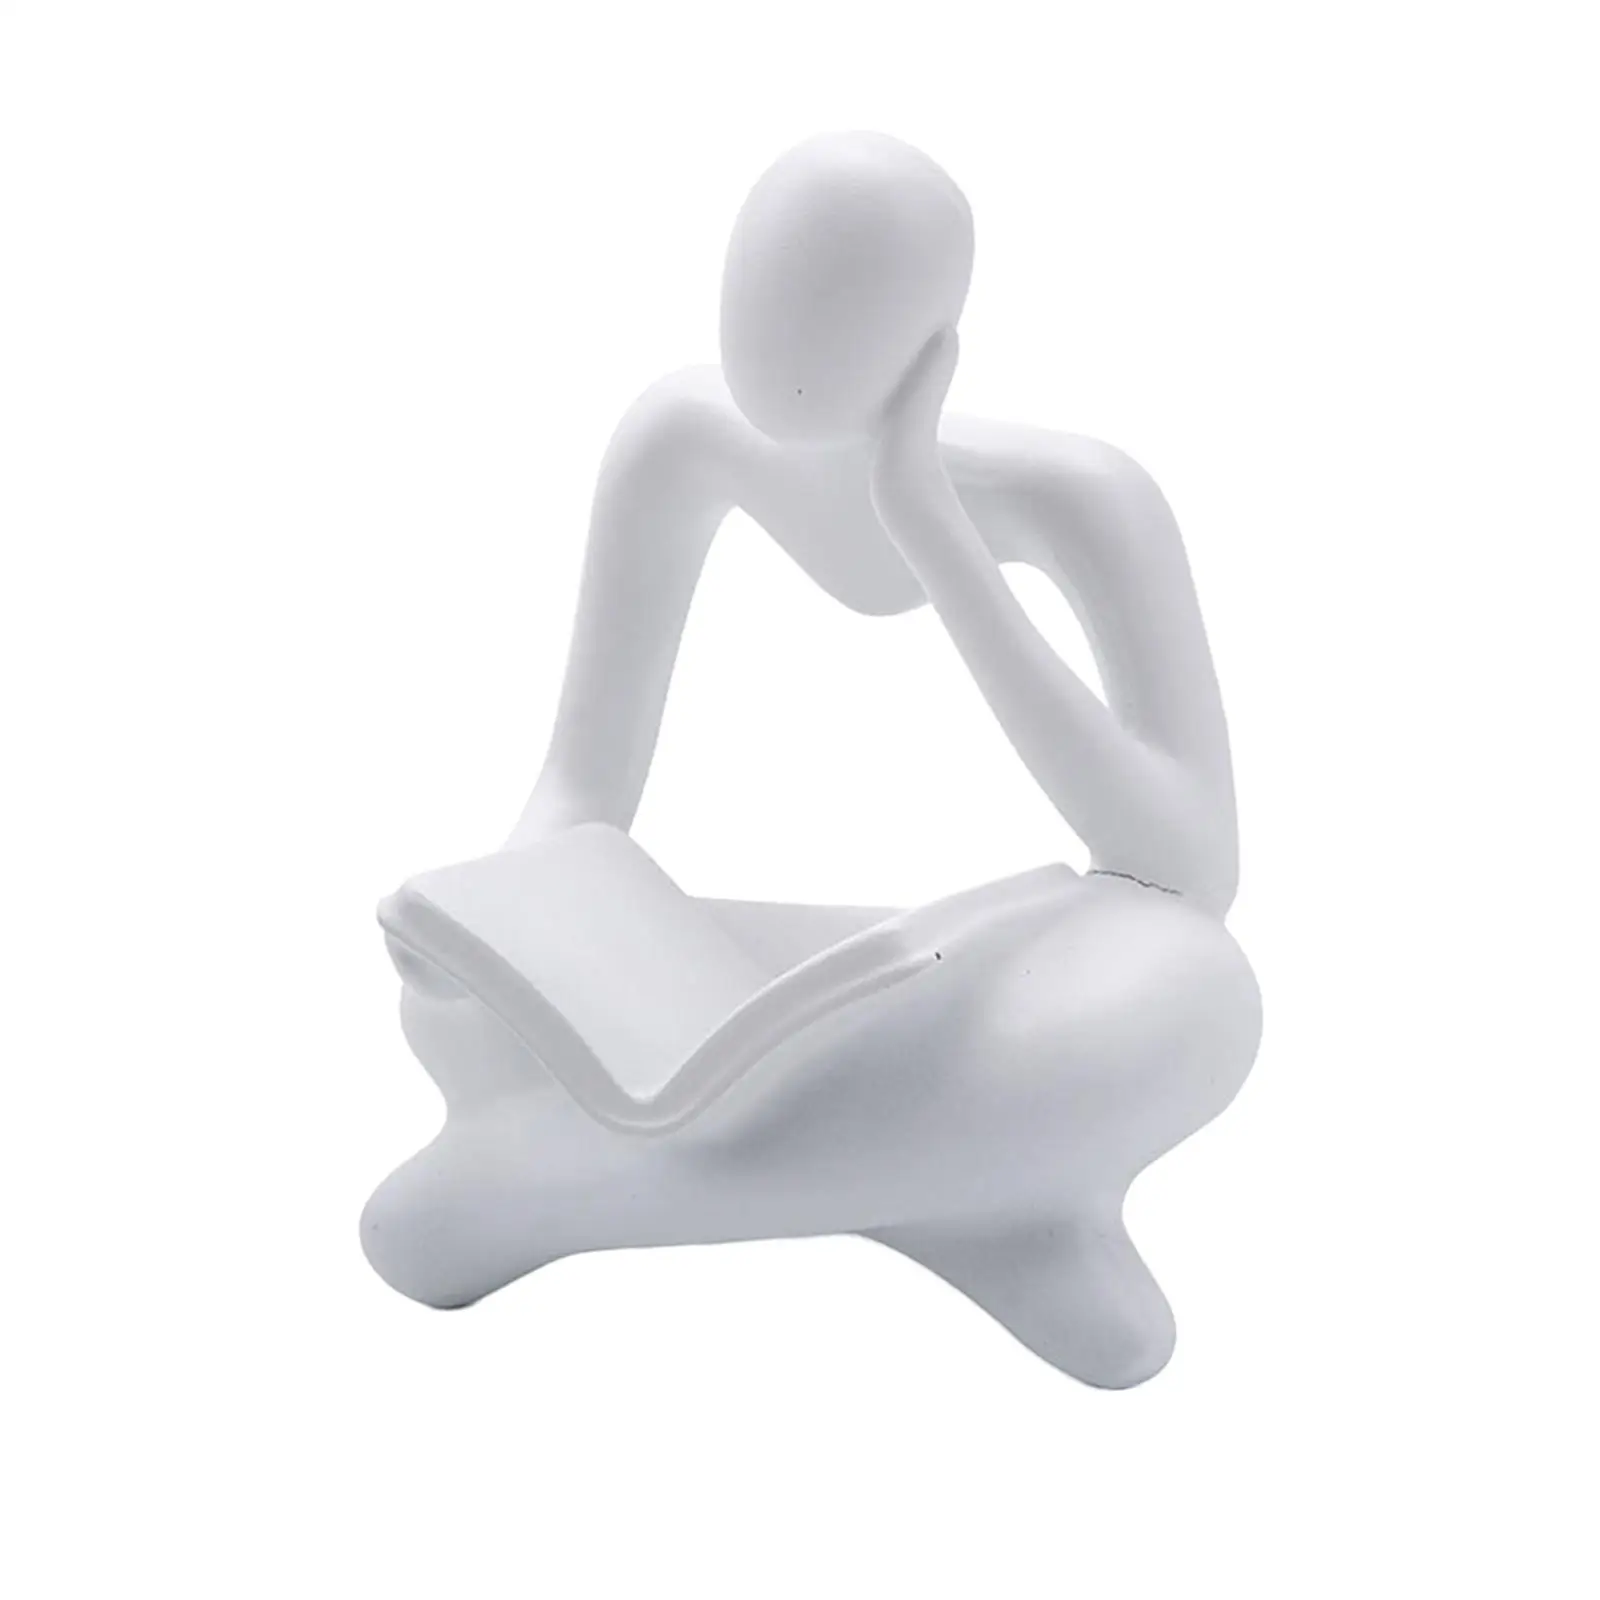 Thinker Statue Human Figurine People Sculpture Collectibles for Countertop